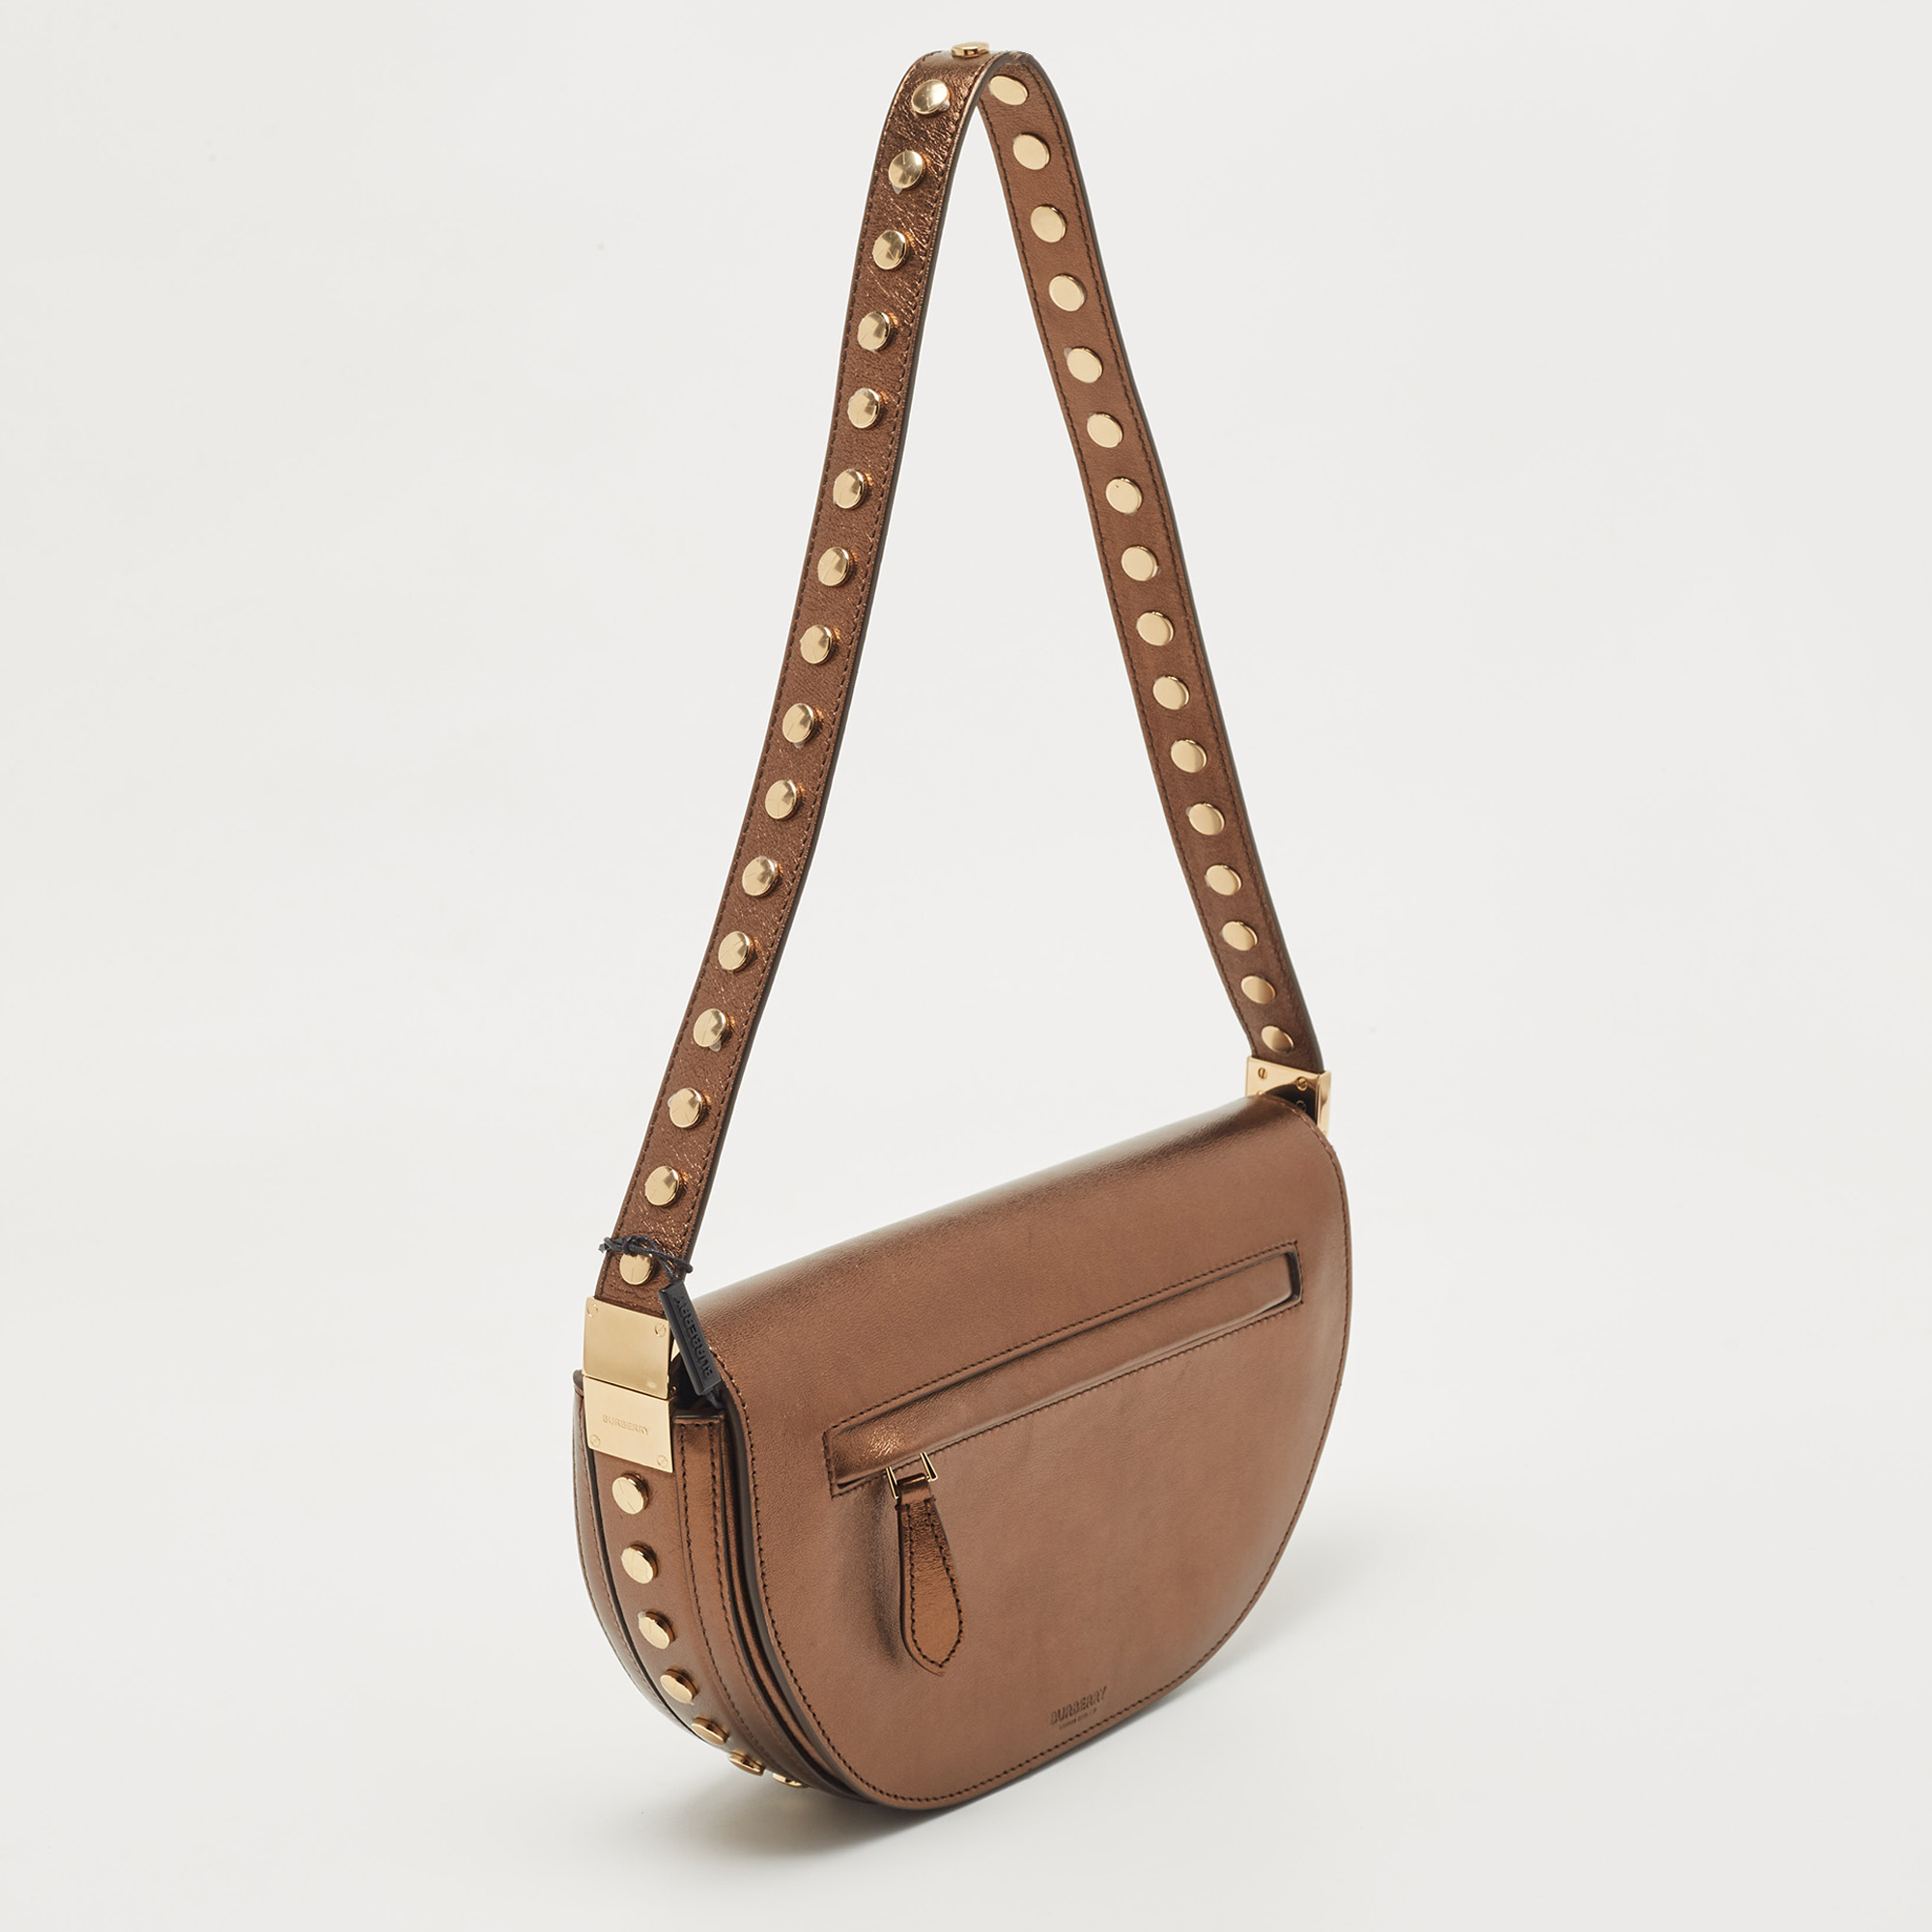 Burberry Bronze Leather Small Studded Olympia Shoulder Bag